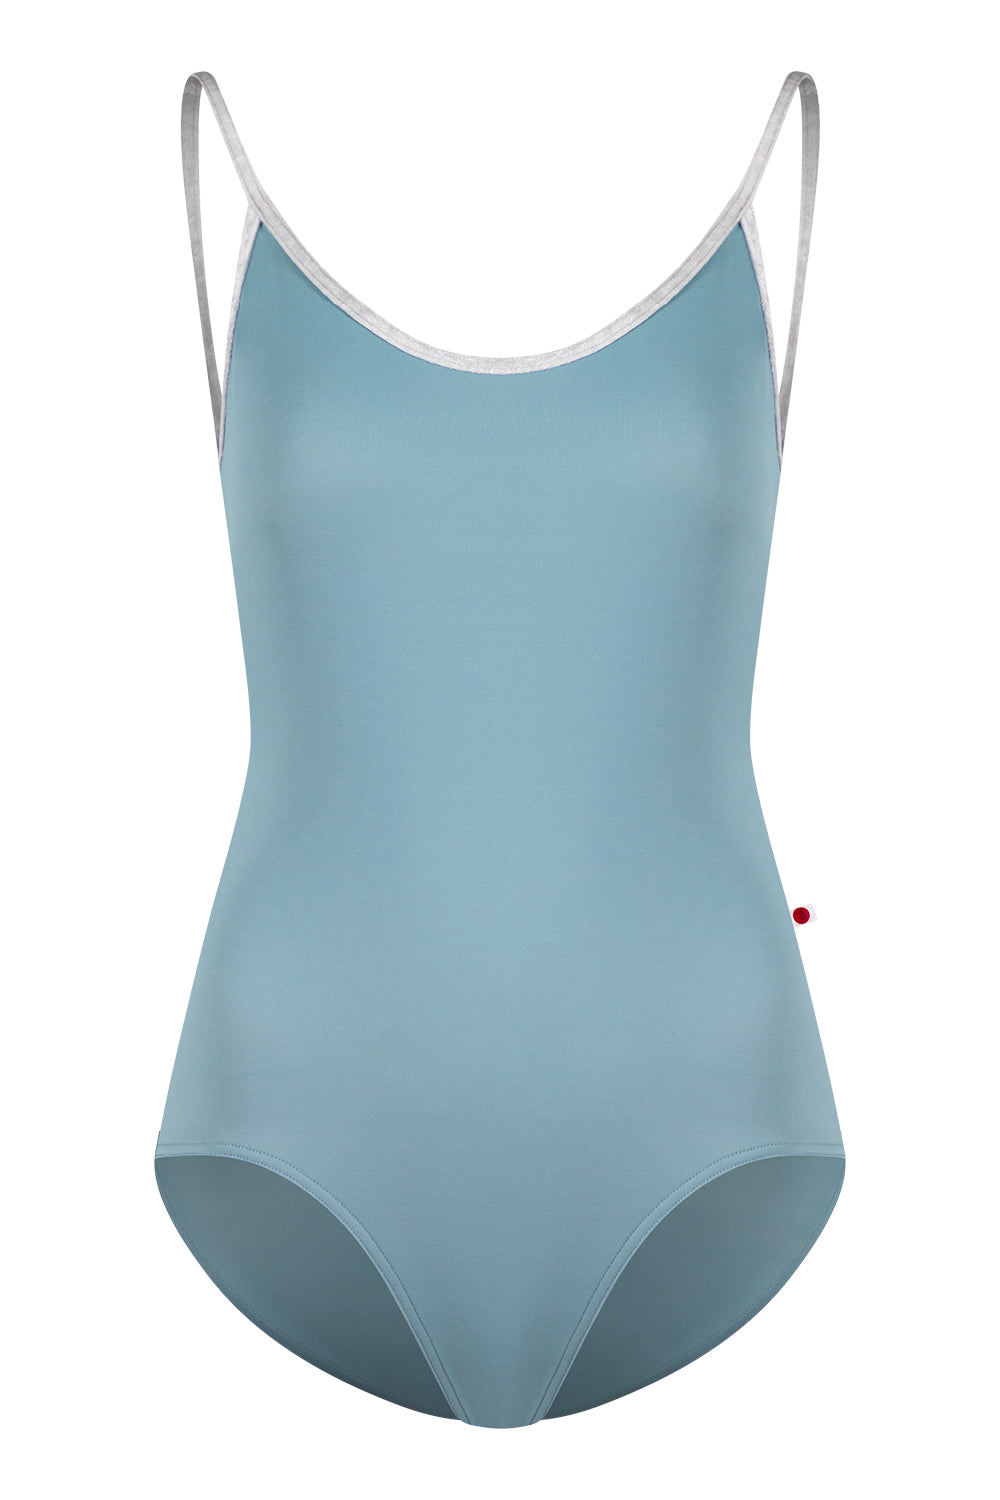 Fiona leotard in T-Fox body color with Mesh Lagoon top color and CV-Silver trim color